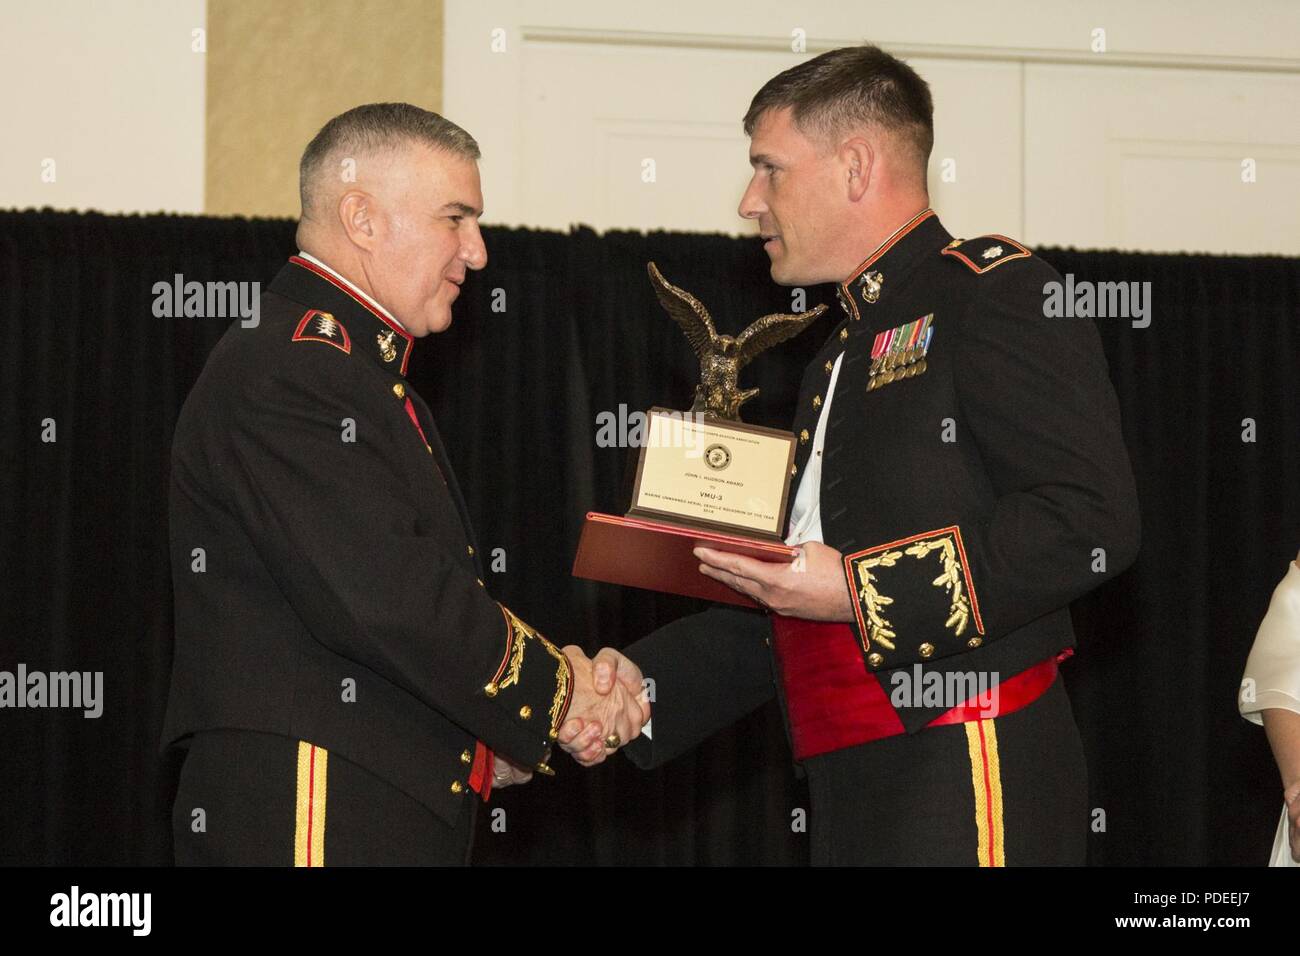 The Assistant Commandant of the Marine Corps Gen. Glenn M. Walters, left, presents the John I. Hudson Award for Marine Unmanned Aerial Vehicle Squadron of the Year to a representative from Marine Unmanned Aerial Vehicle Squadron 3 (VMU-3), Marine Aircraft Group 24 (MAG-24) during the 47th annual Marine Corps Aviation Association (MCAA) Symposium and Awards Banquet, San Diego, Calif., May 18, 2018. Walters was the guest speaker for the event and presented 13 unit awards and 16 individual awards during the ceremony. Stock Photo